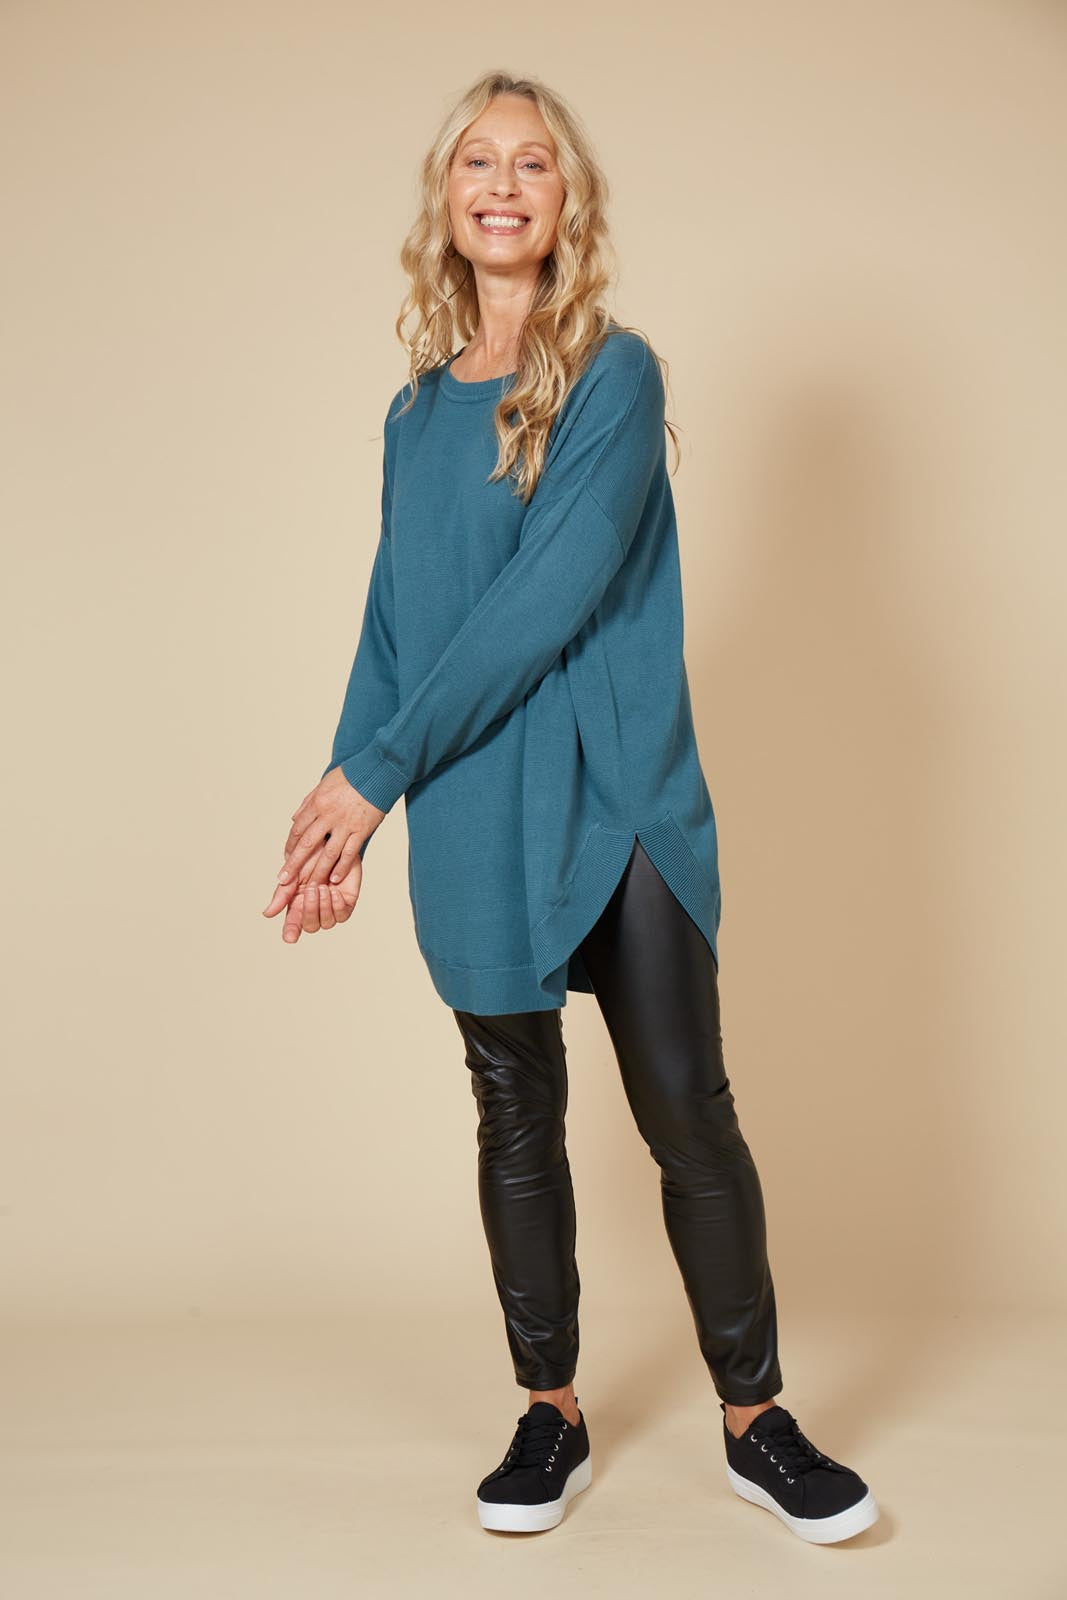 Cleo Jumper - Teal - eb&ive Clothing - Knit Jumper One Size